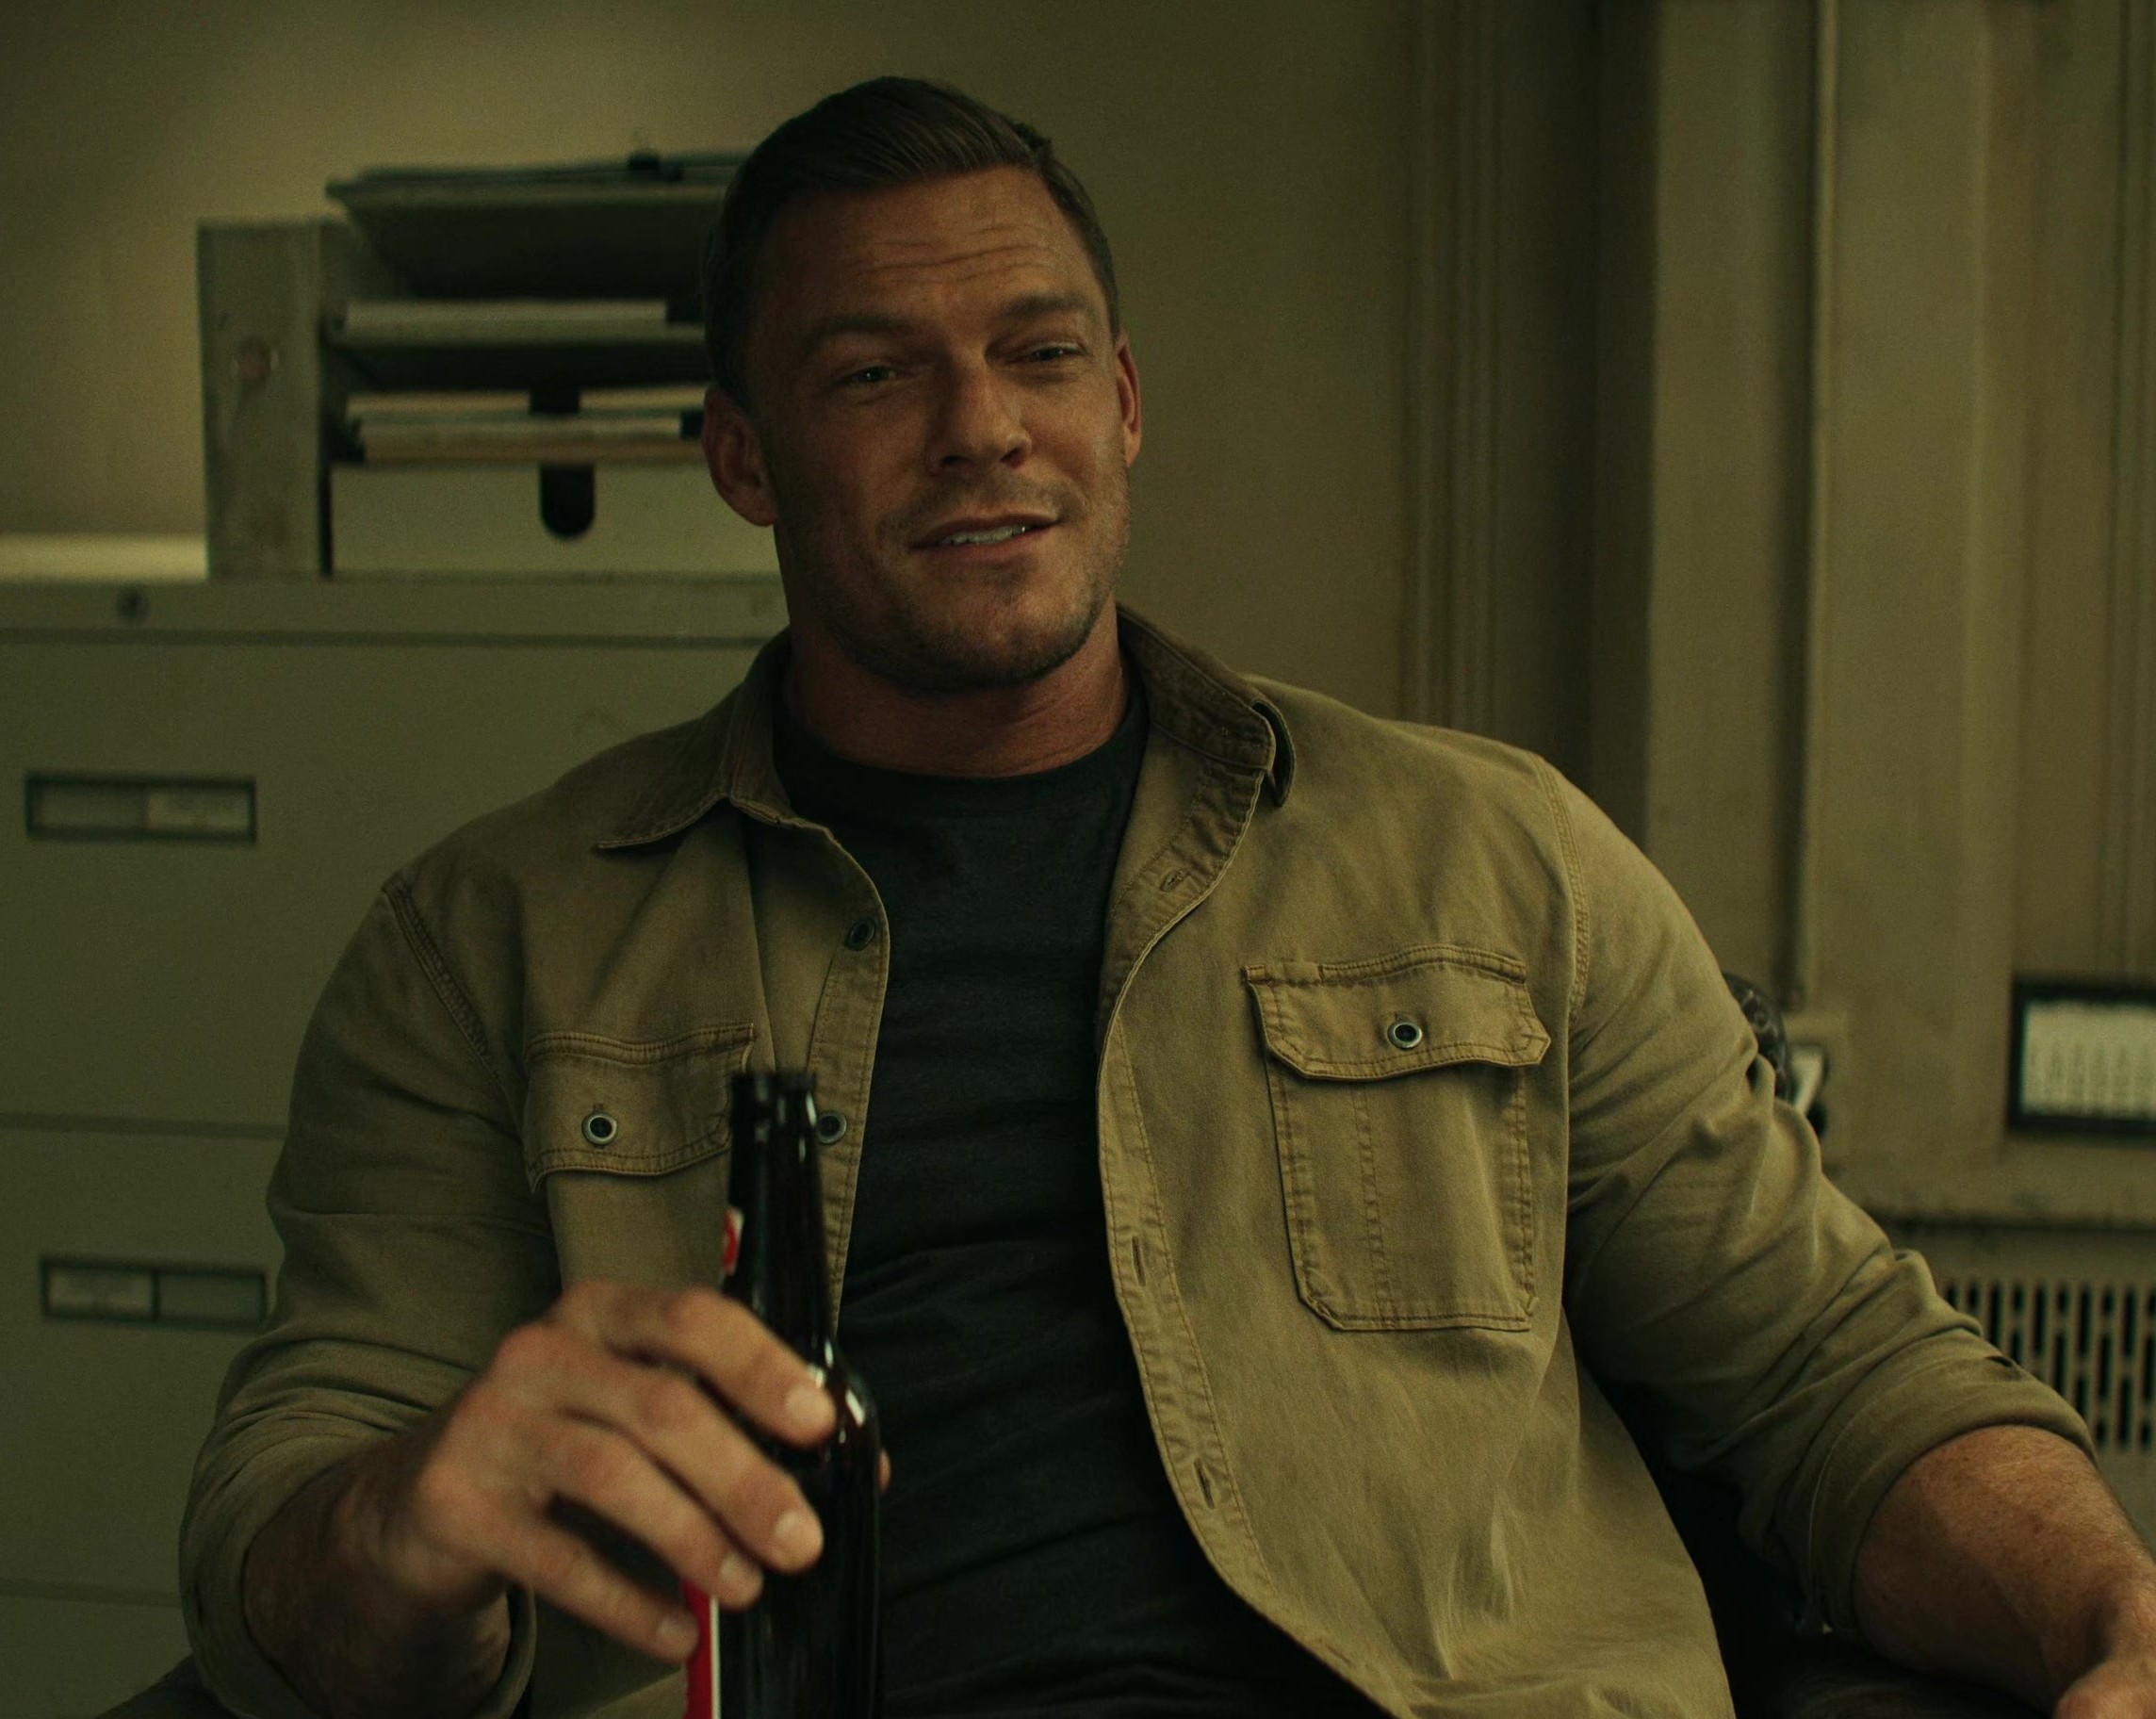 Worn on Reacher TV Show - Casual Khaki Military Shirt with Front Pockets of Alan Ritchson as Jack Reacher